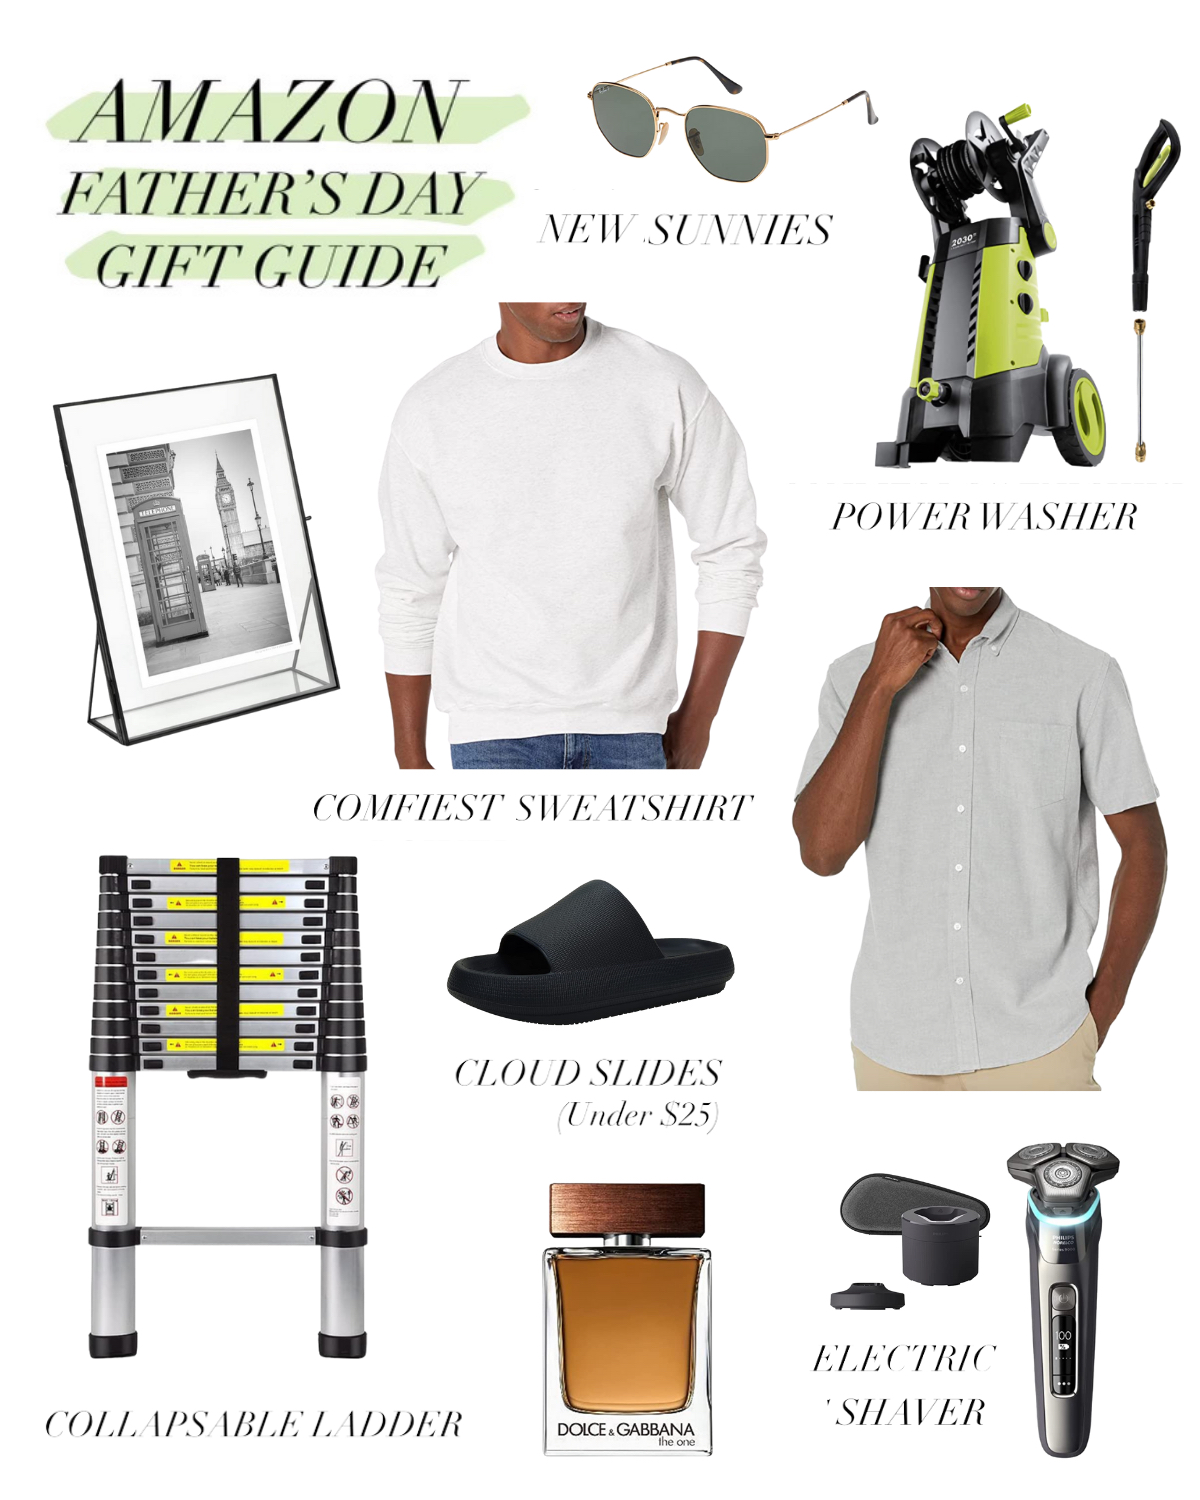 amazon souvenir guide, fathers day souvenir ideas, fathers day souvenir guide, fathers day, amazon, mens clothing, deject slides, power washer, electric shaver, ladder, cologne, ray bans, sunglasses.